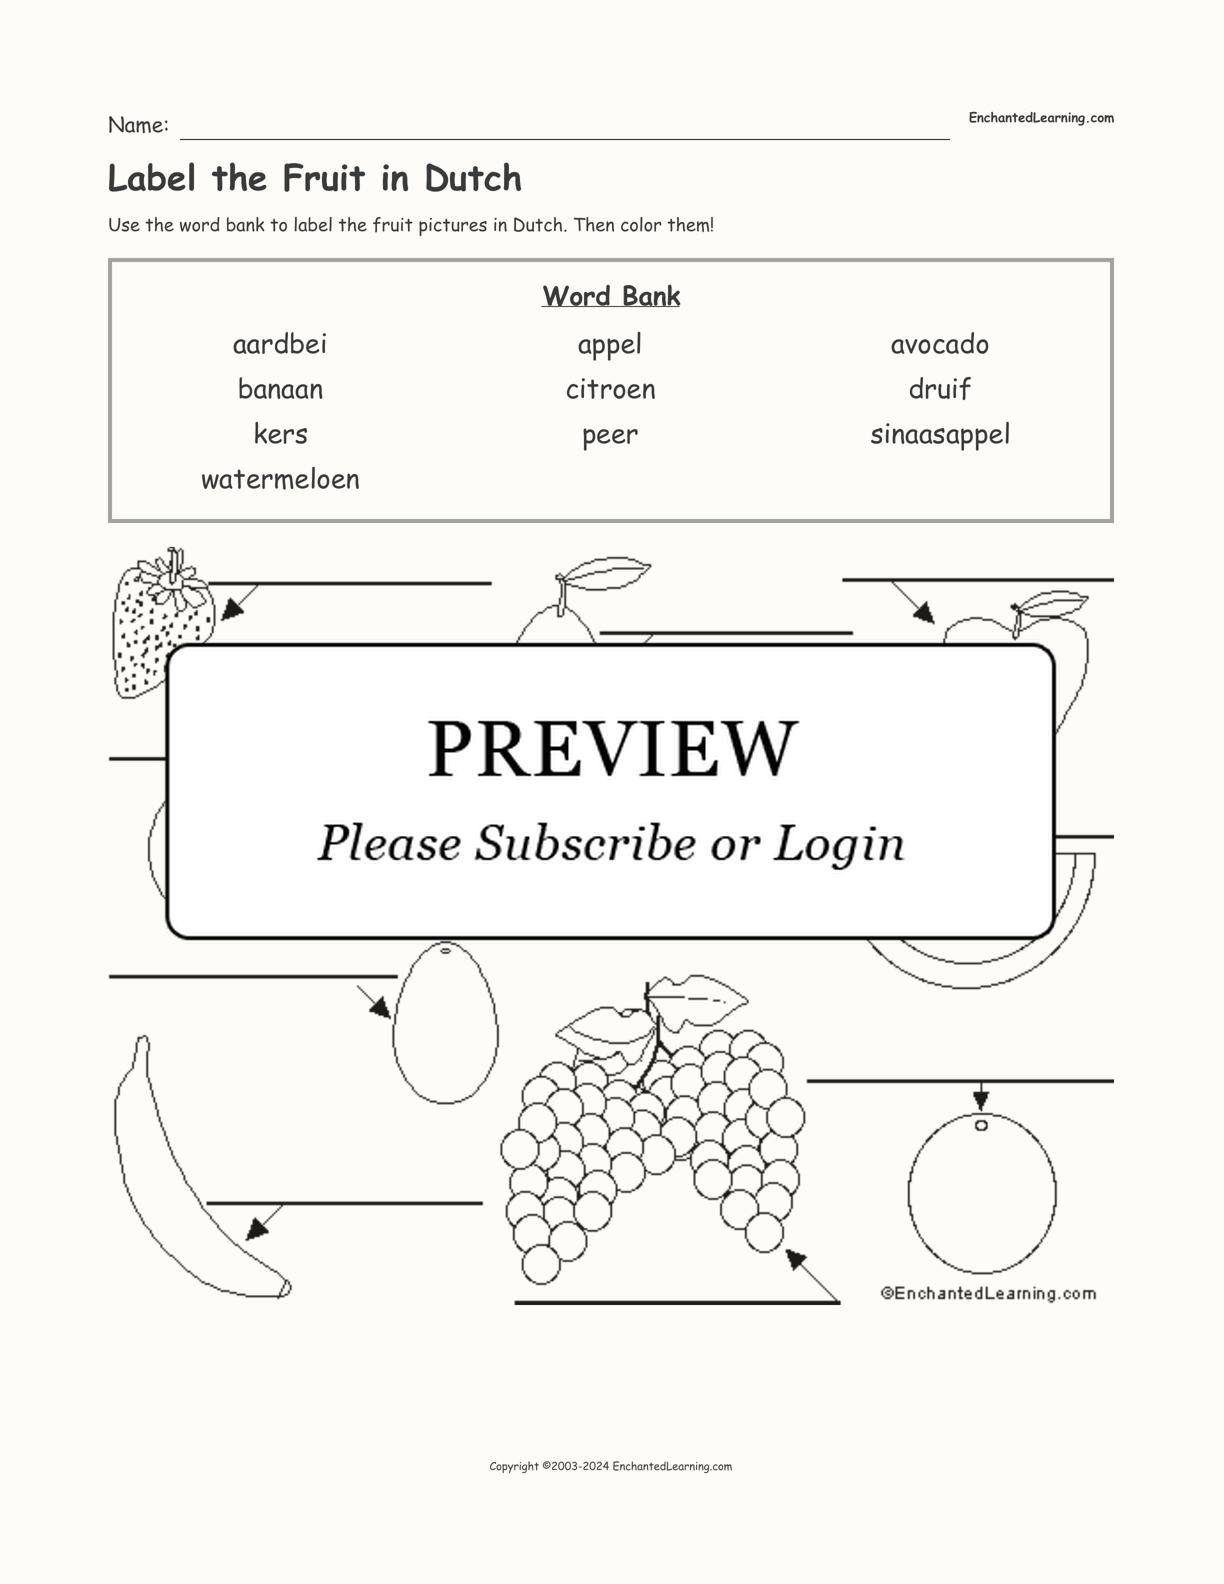 Label the Fruit in Dutch interactive worksheet page 1